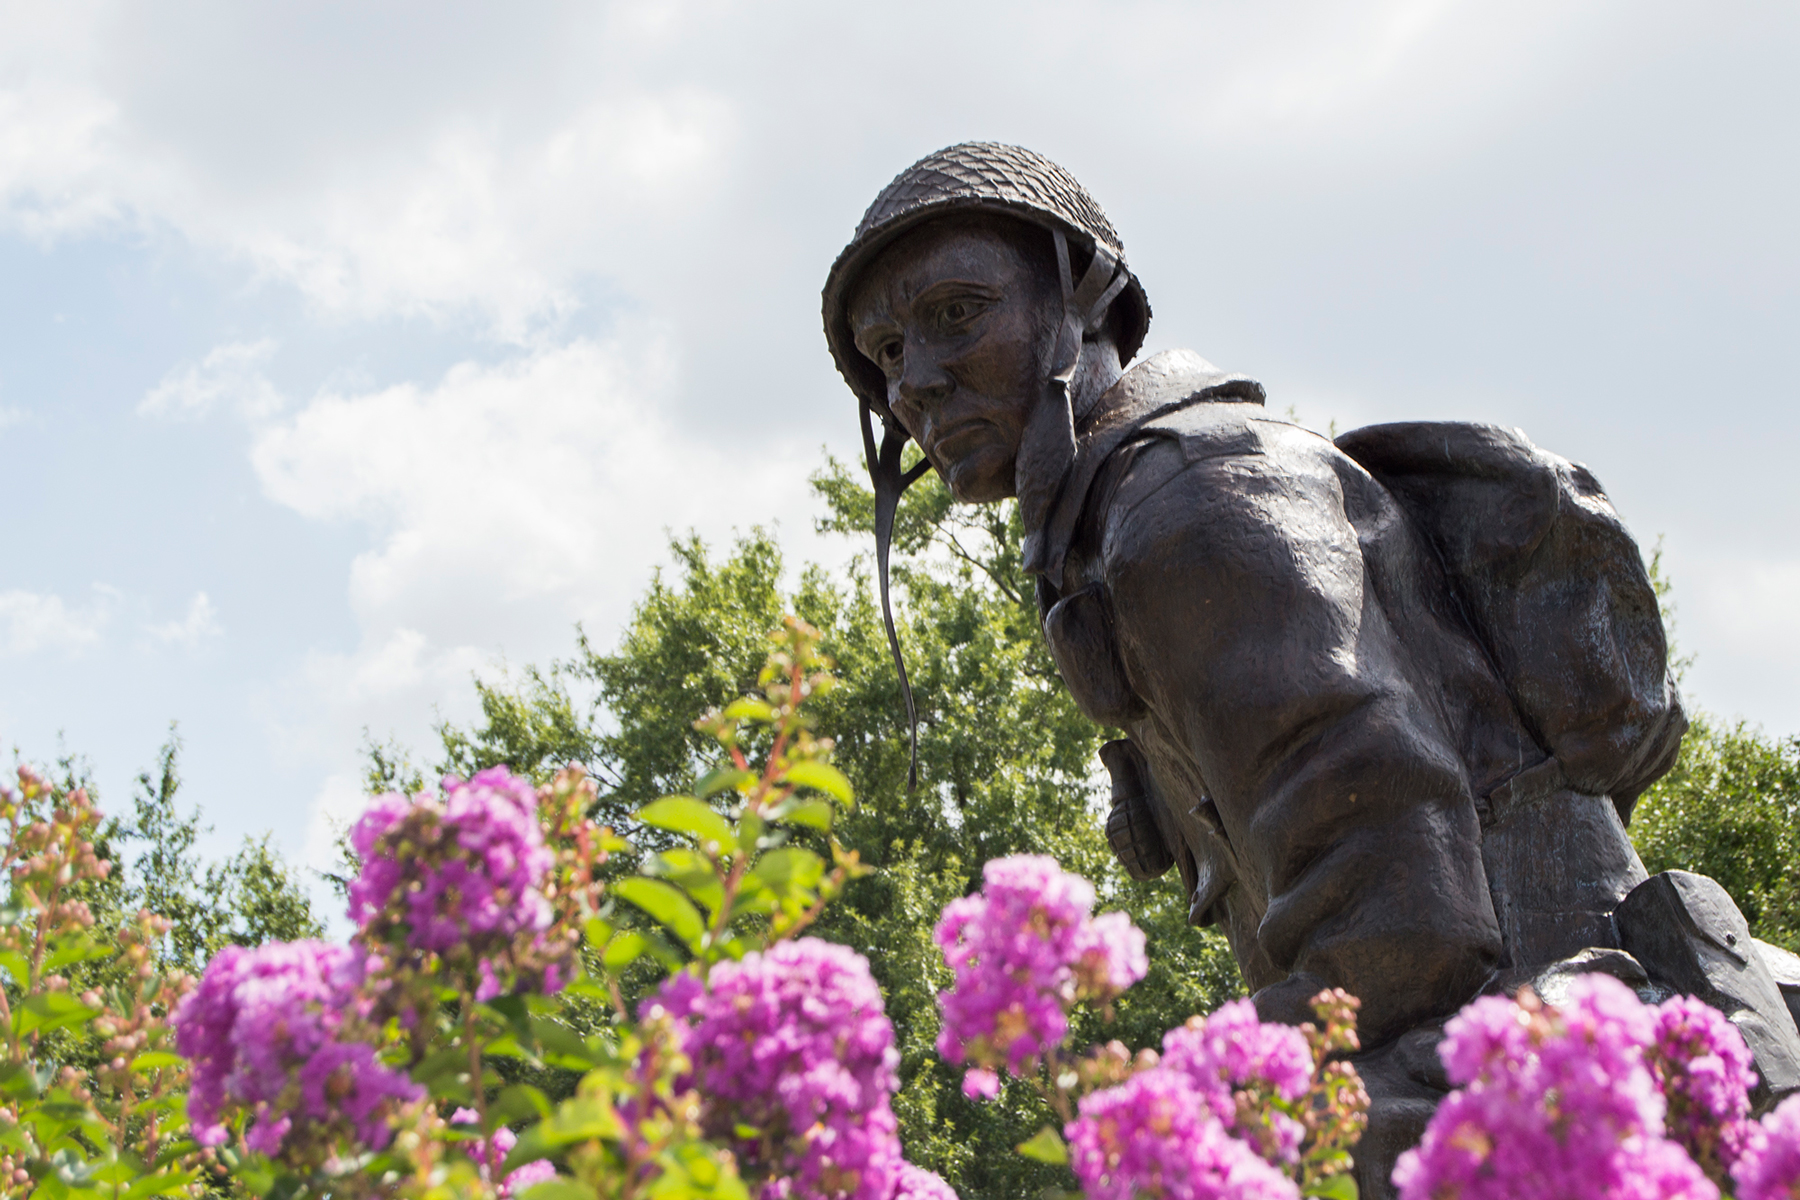 The “Iron Mike” statue on the grounds at Fort Bragg in North Carolina represents the “courage, dedication, and traditions” of paratroopers from the 82nd Airborne Division. (Michael Olinger/News21)